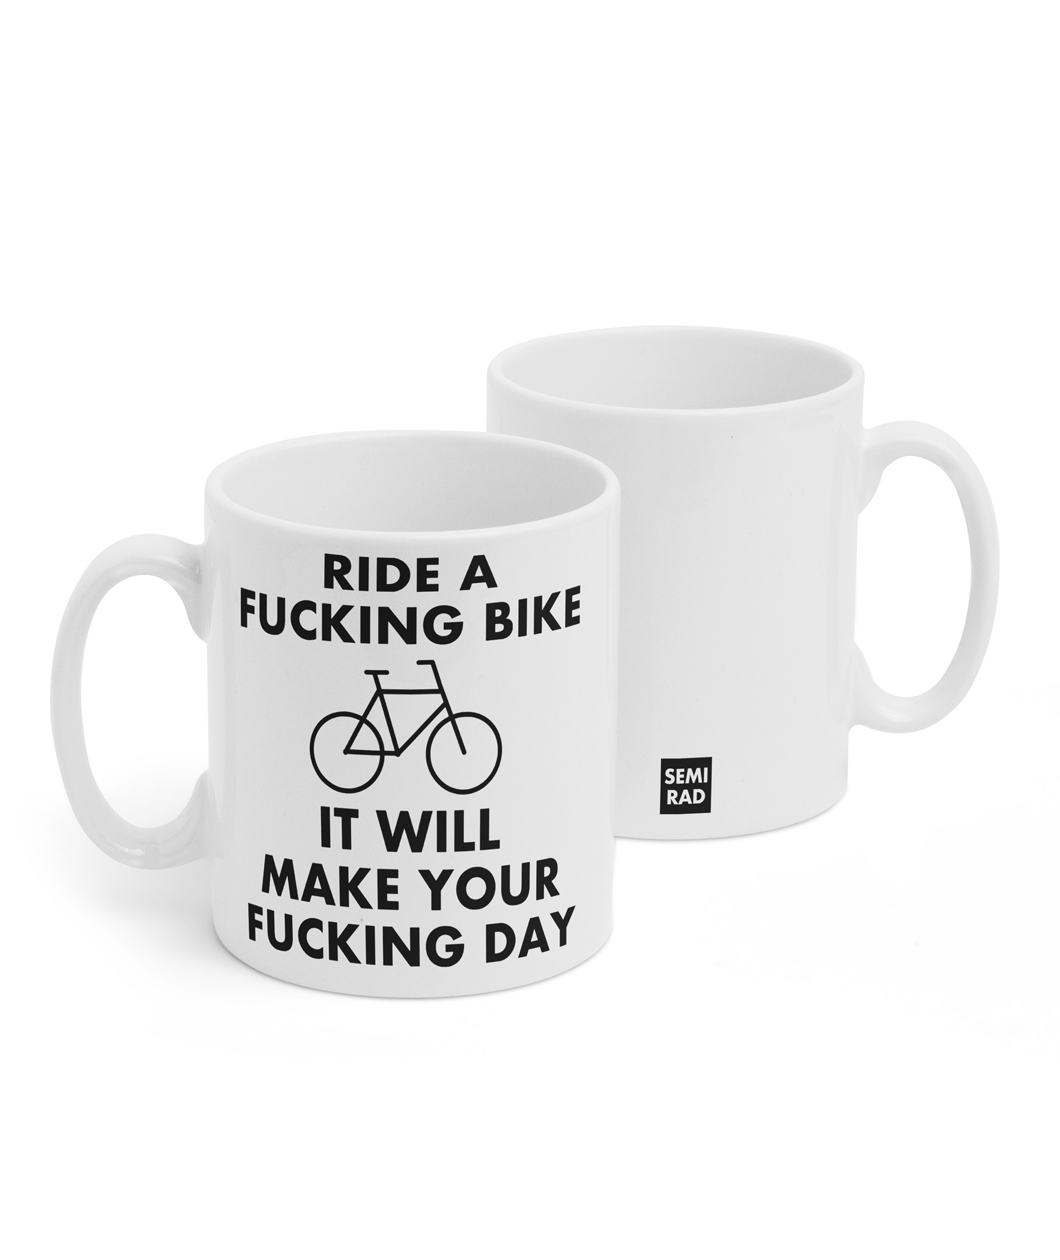 Two white mugs sitting next to each other showing two sides of the same mug. The front side has text that reads "Ride a fucking bike; it will make your fucking day better" with a stick figure bike in the midddle of the sentence. On the back of the mug is a small black square with the words "Semi Rad".